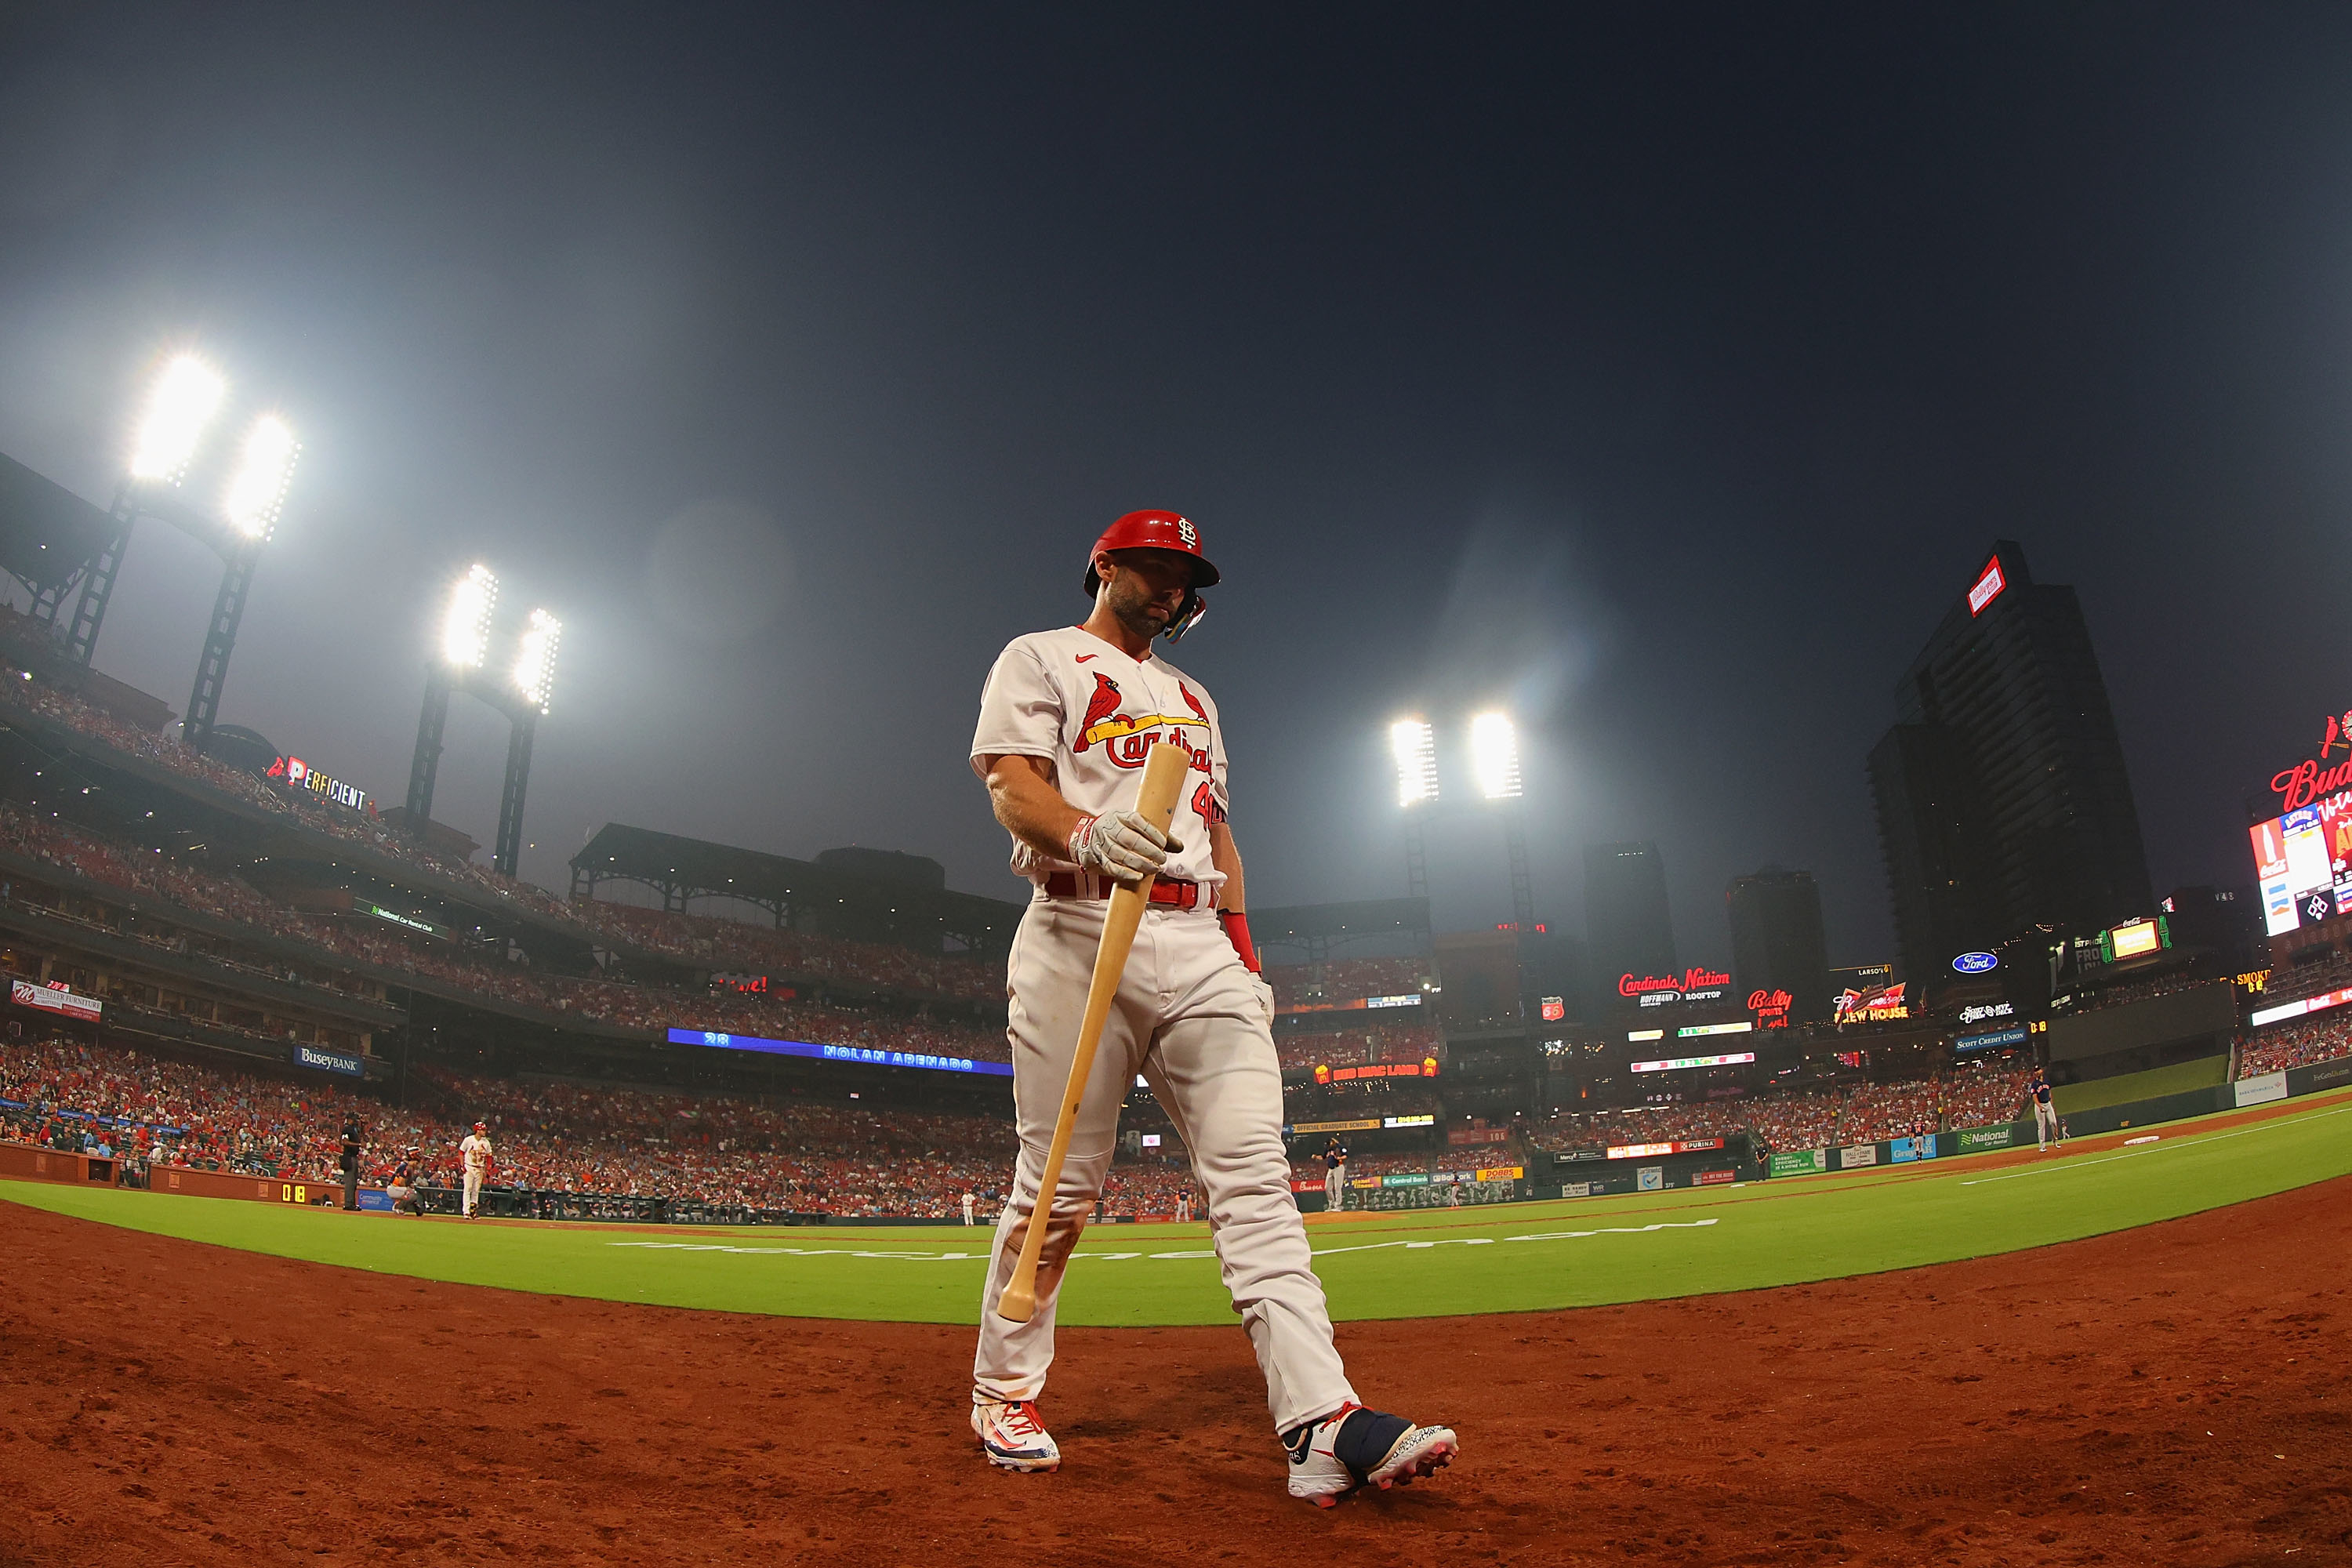 A member of the St. Louis Cardinals walking off the field under the lights